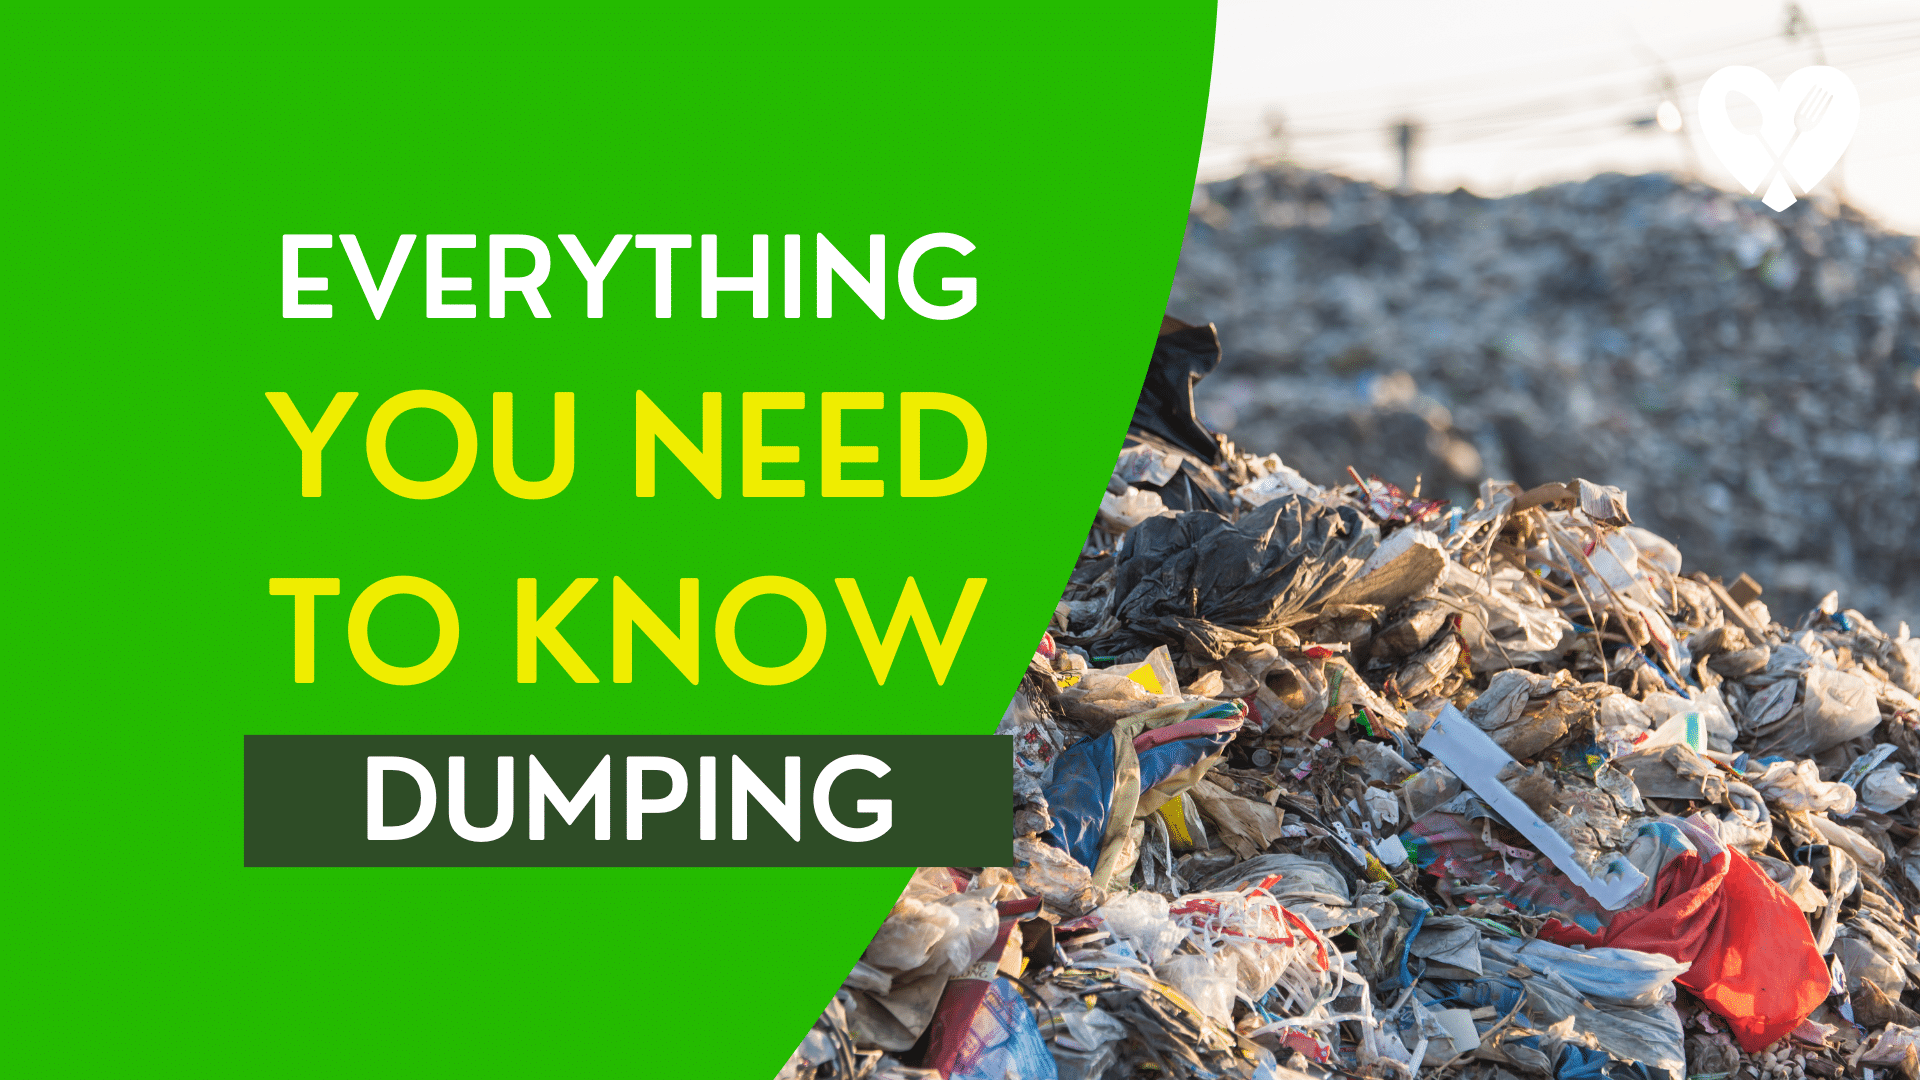 Everything you need to know about Orange County's dumping regulations